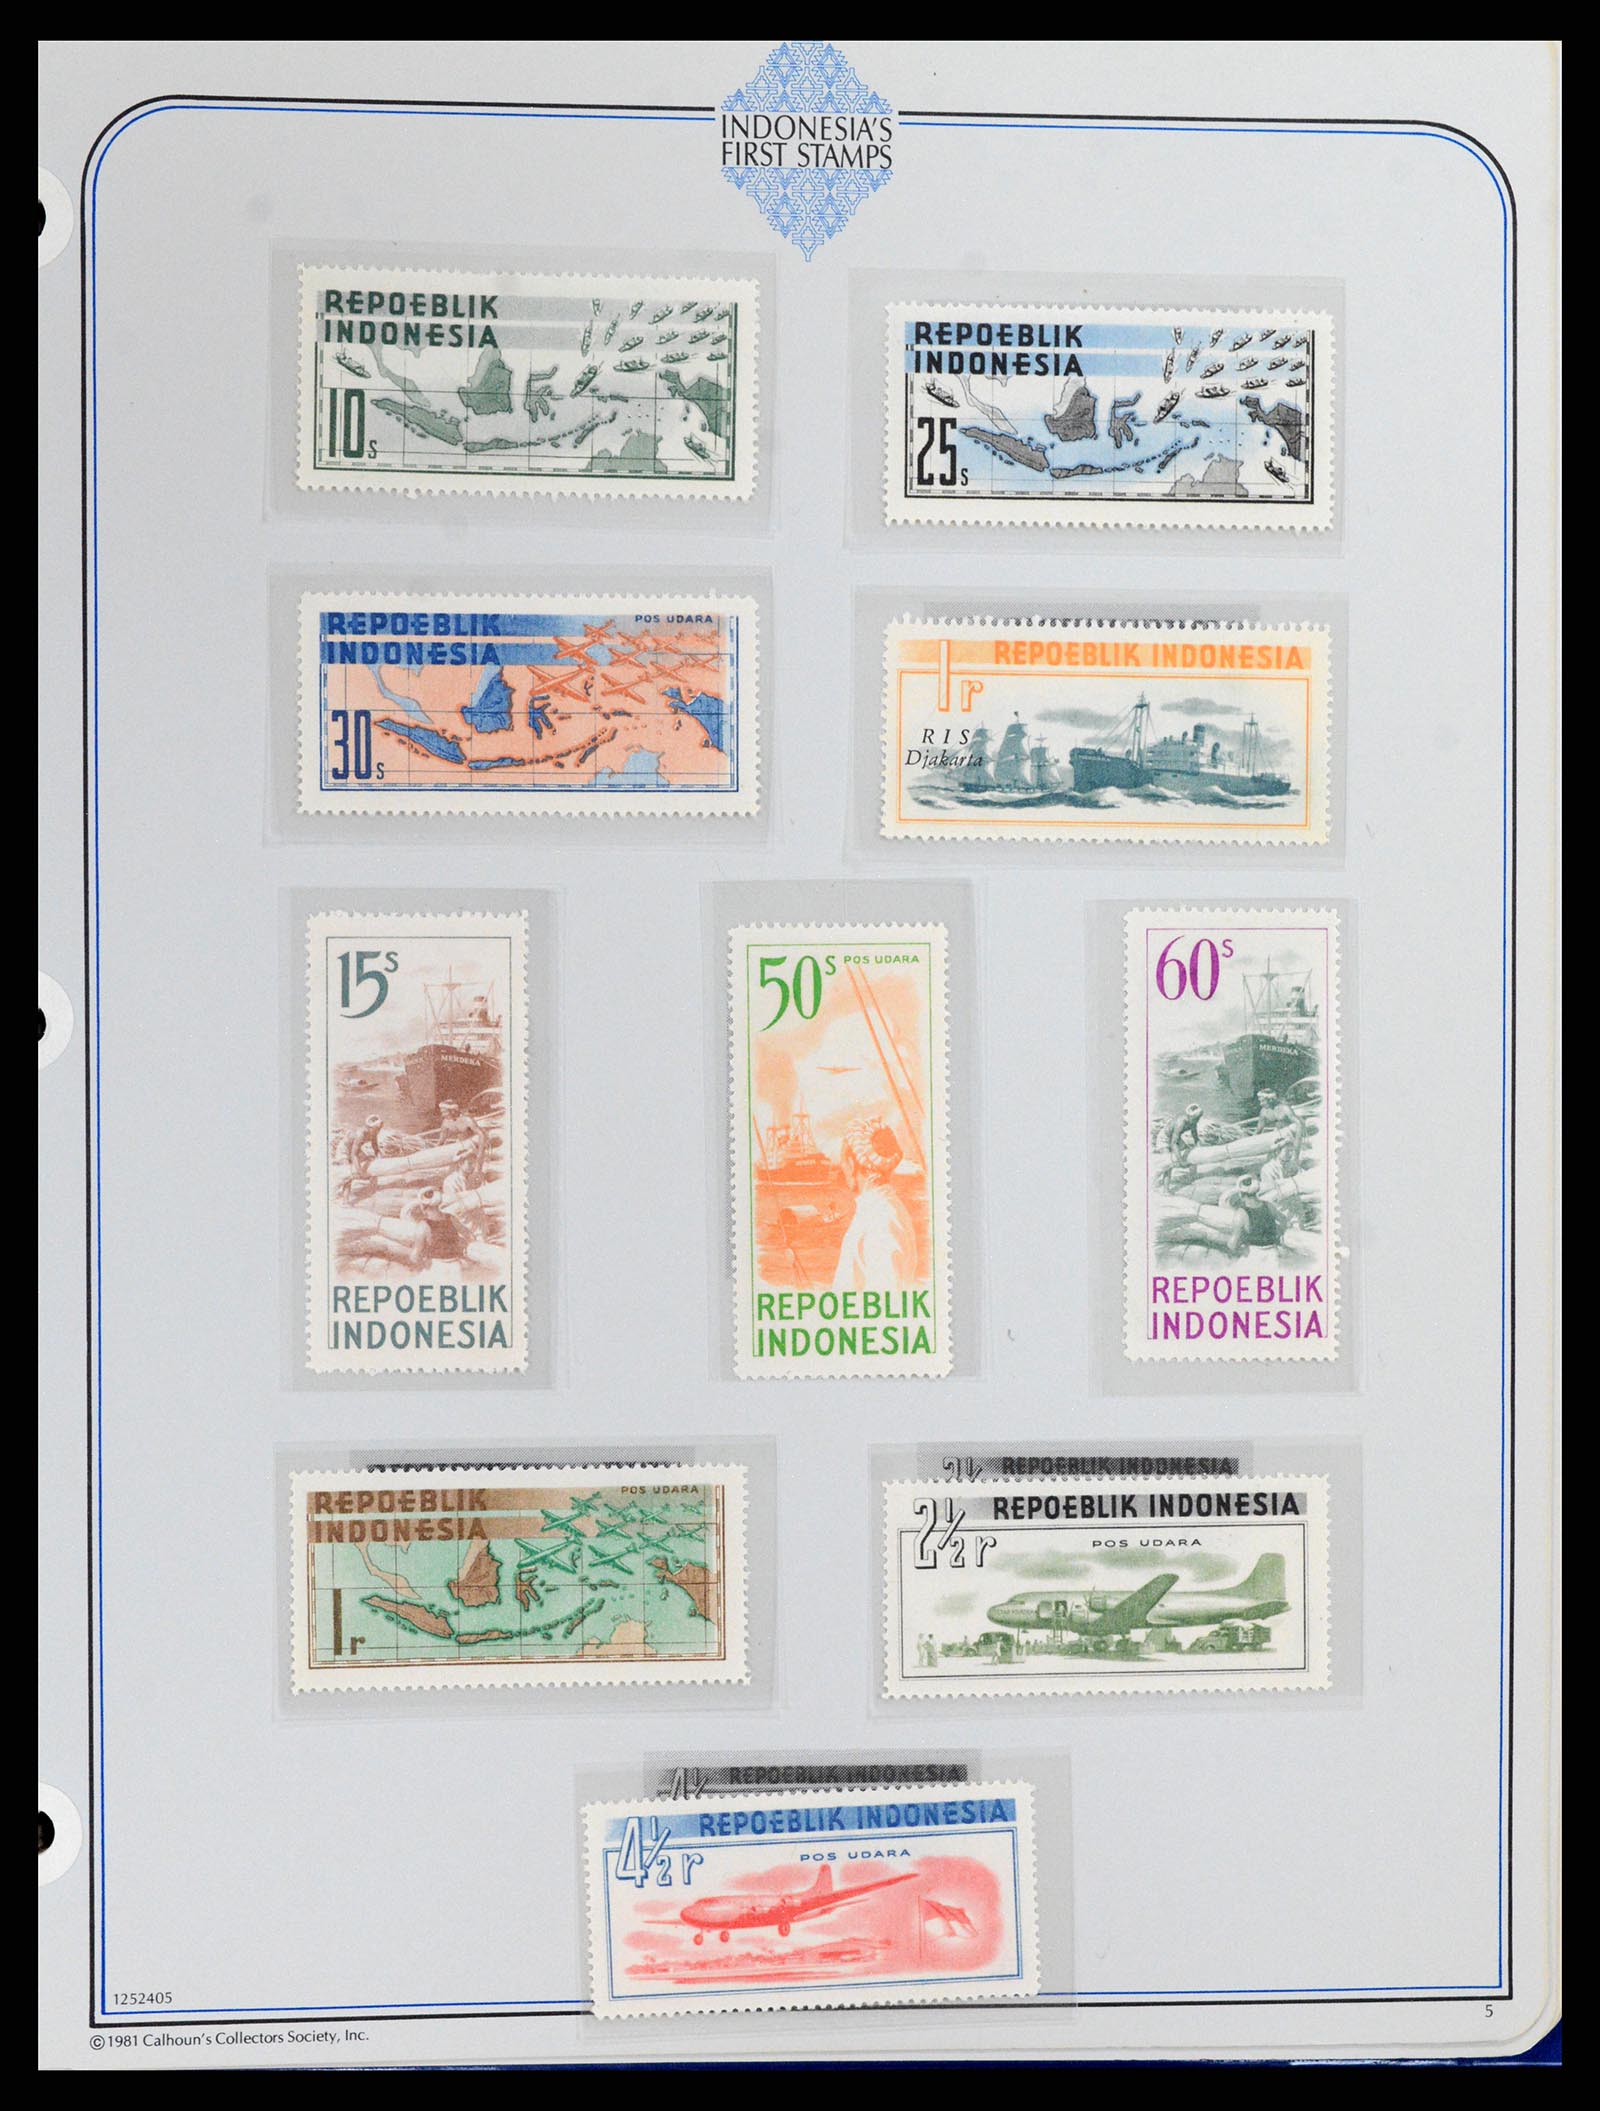 37826 005 - Stamp Collection 37826 Indonesia Vienna printings 1947-1949.